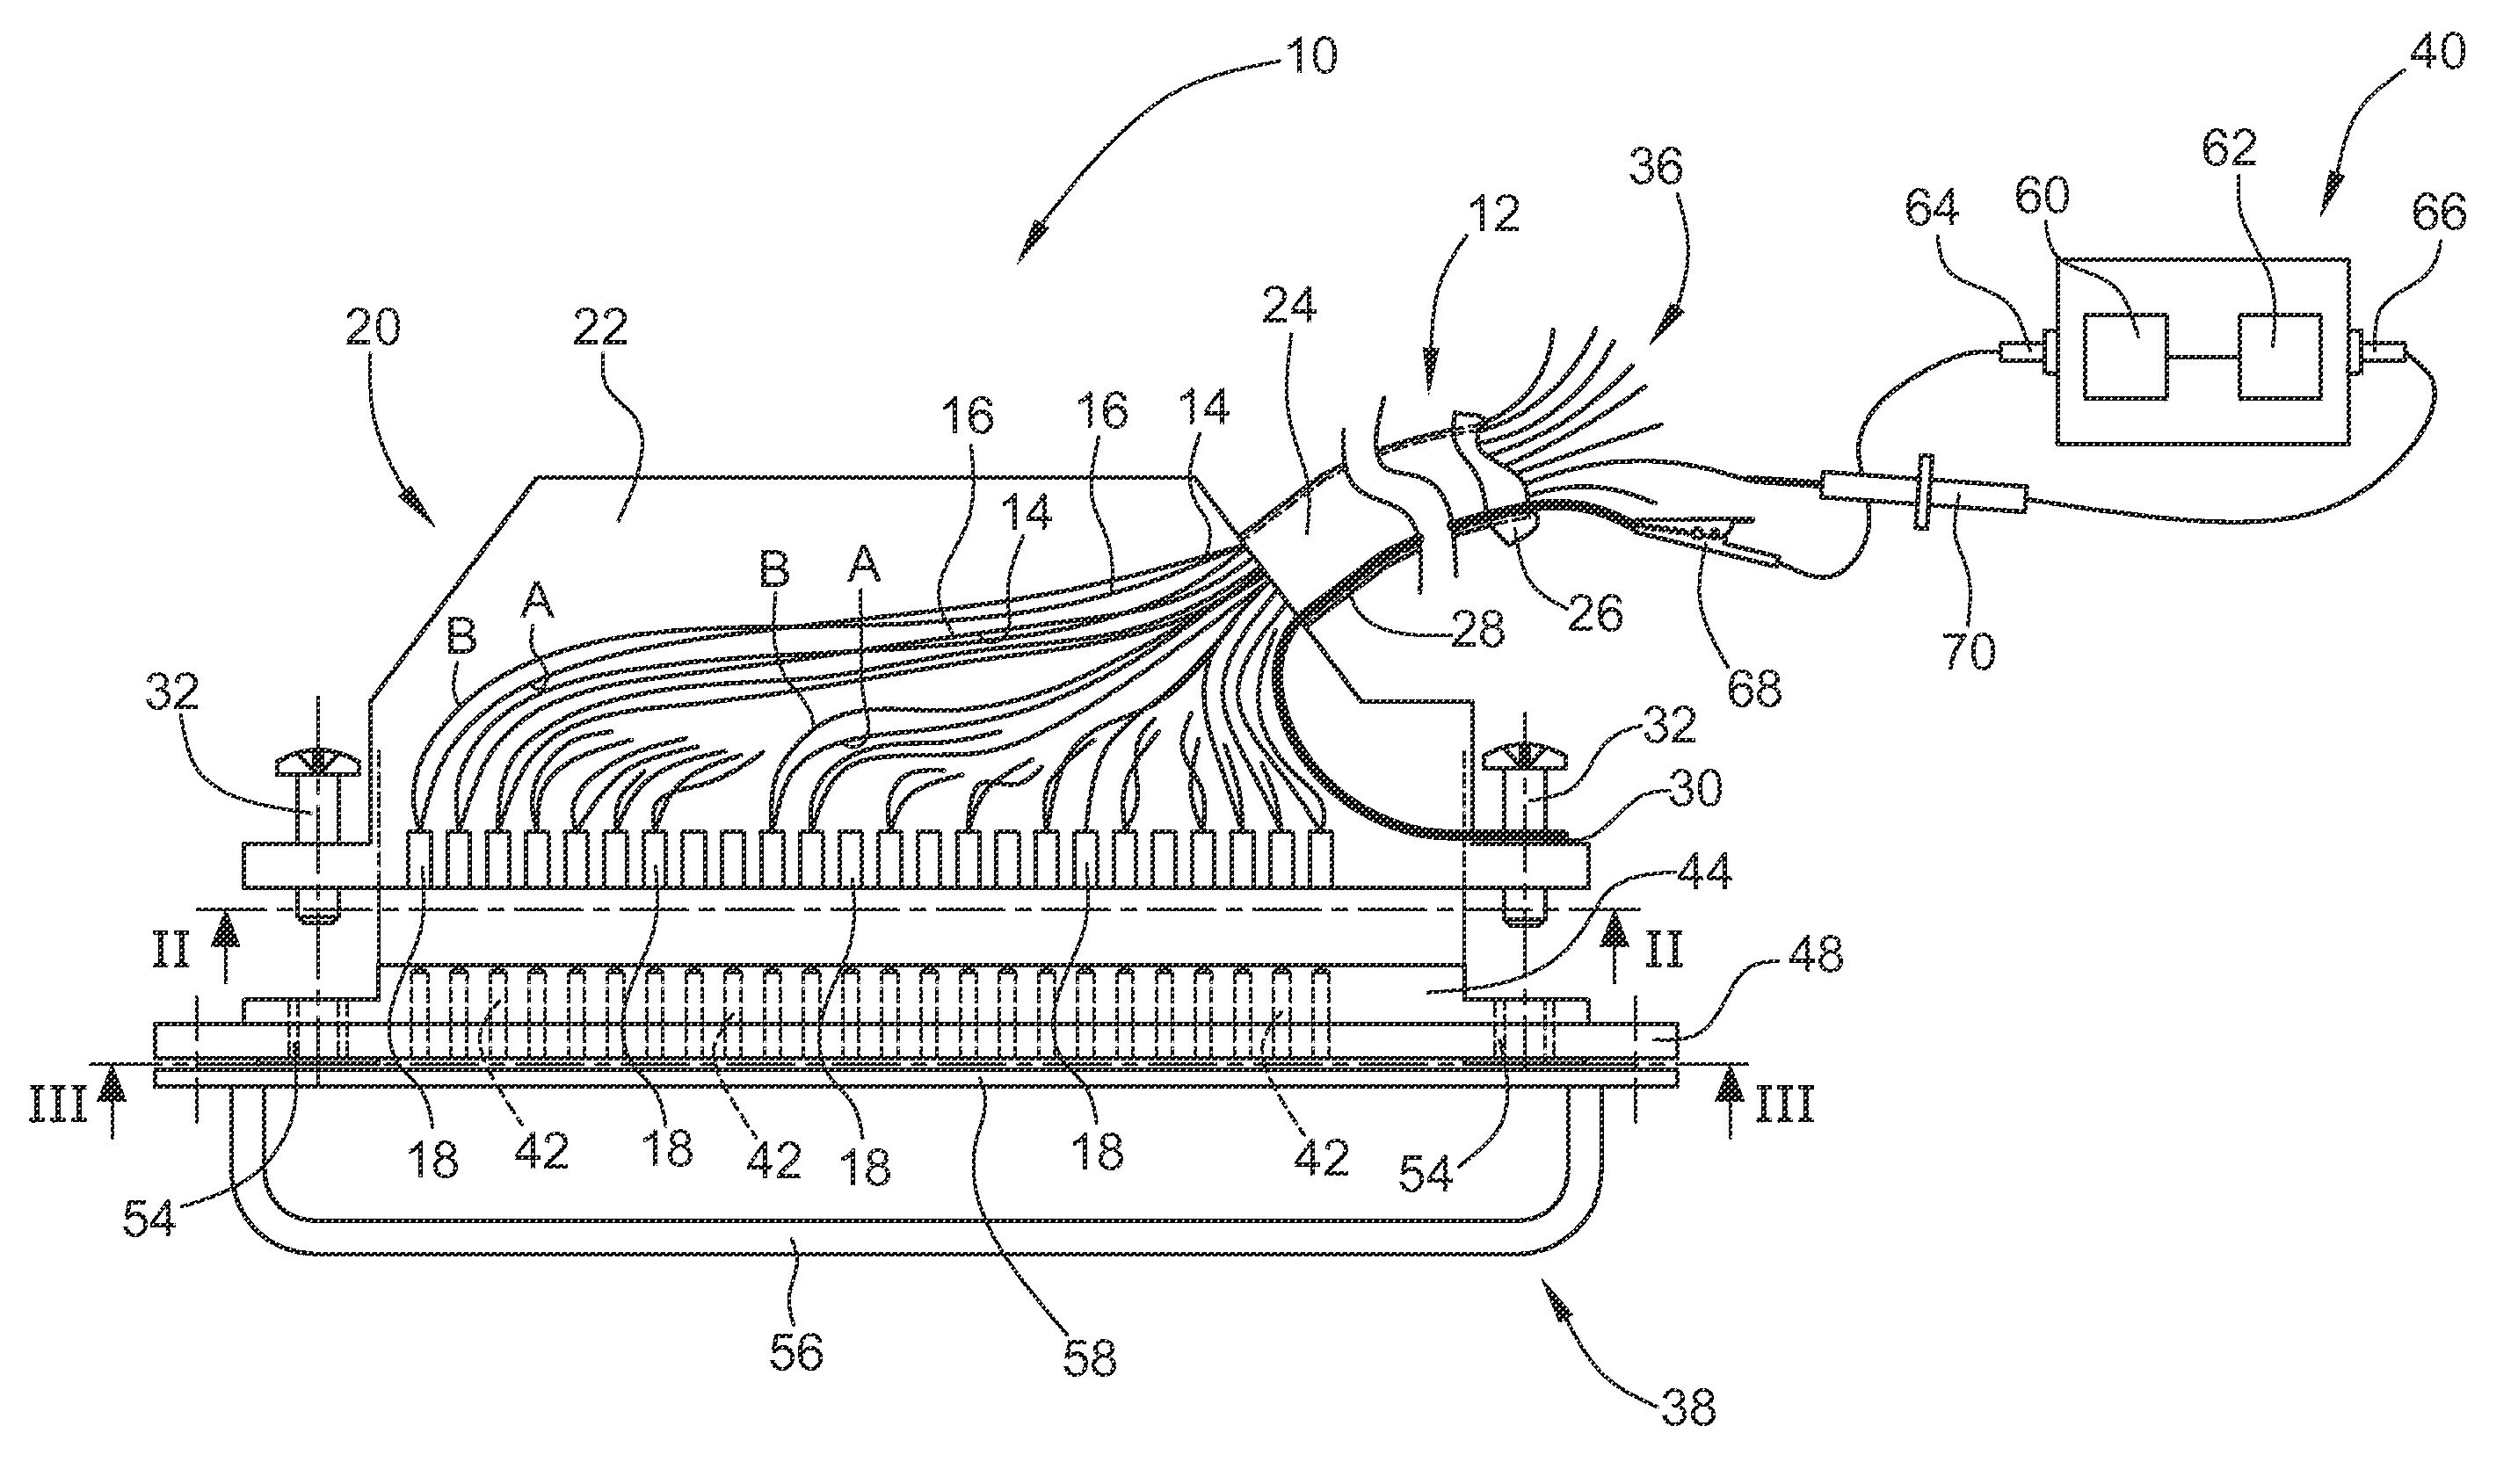 Method for distinguishing a first group of wires from other wires of a multi-wire cable, test connector for use in this method and a kit comprising such a multi-wire cable and test connector